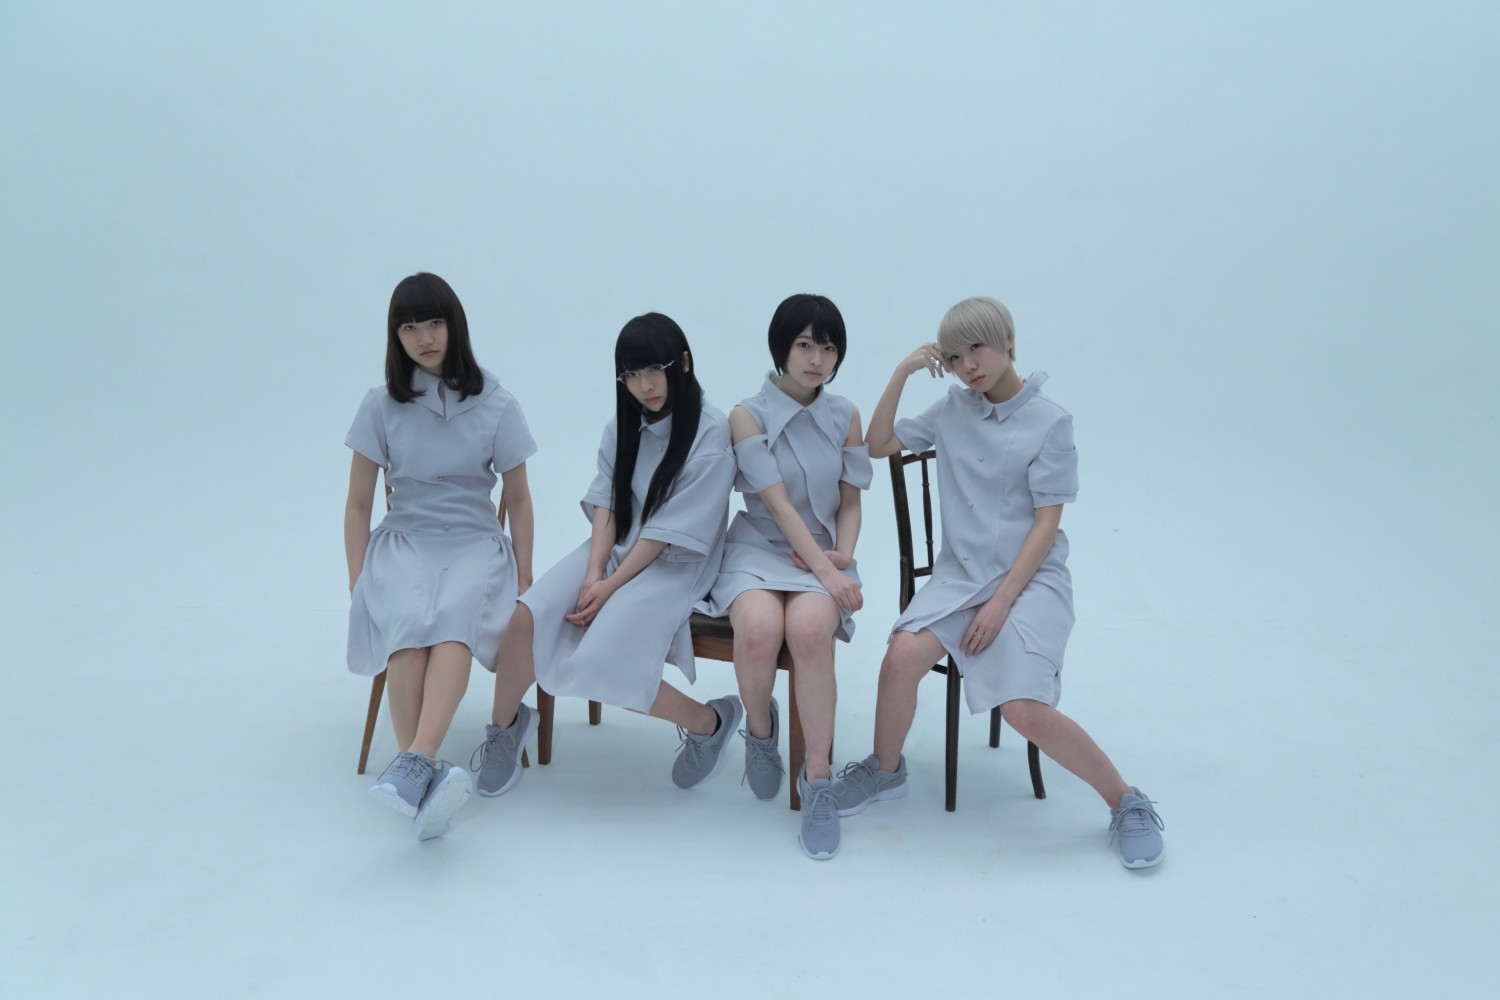 Maison book girl Leads to Their Unique World! New EP “summer continue” Announced!